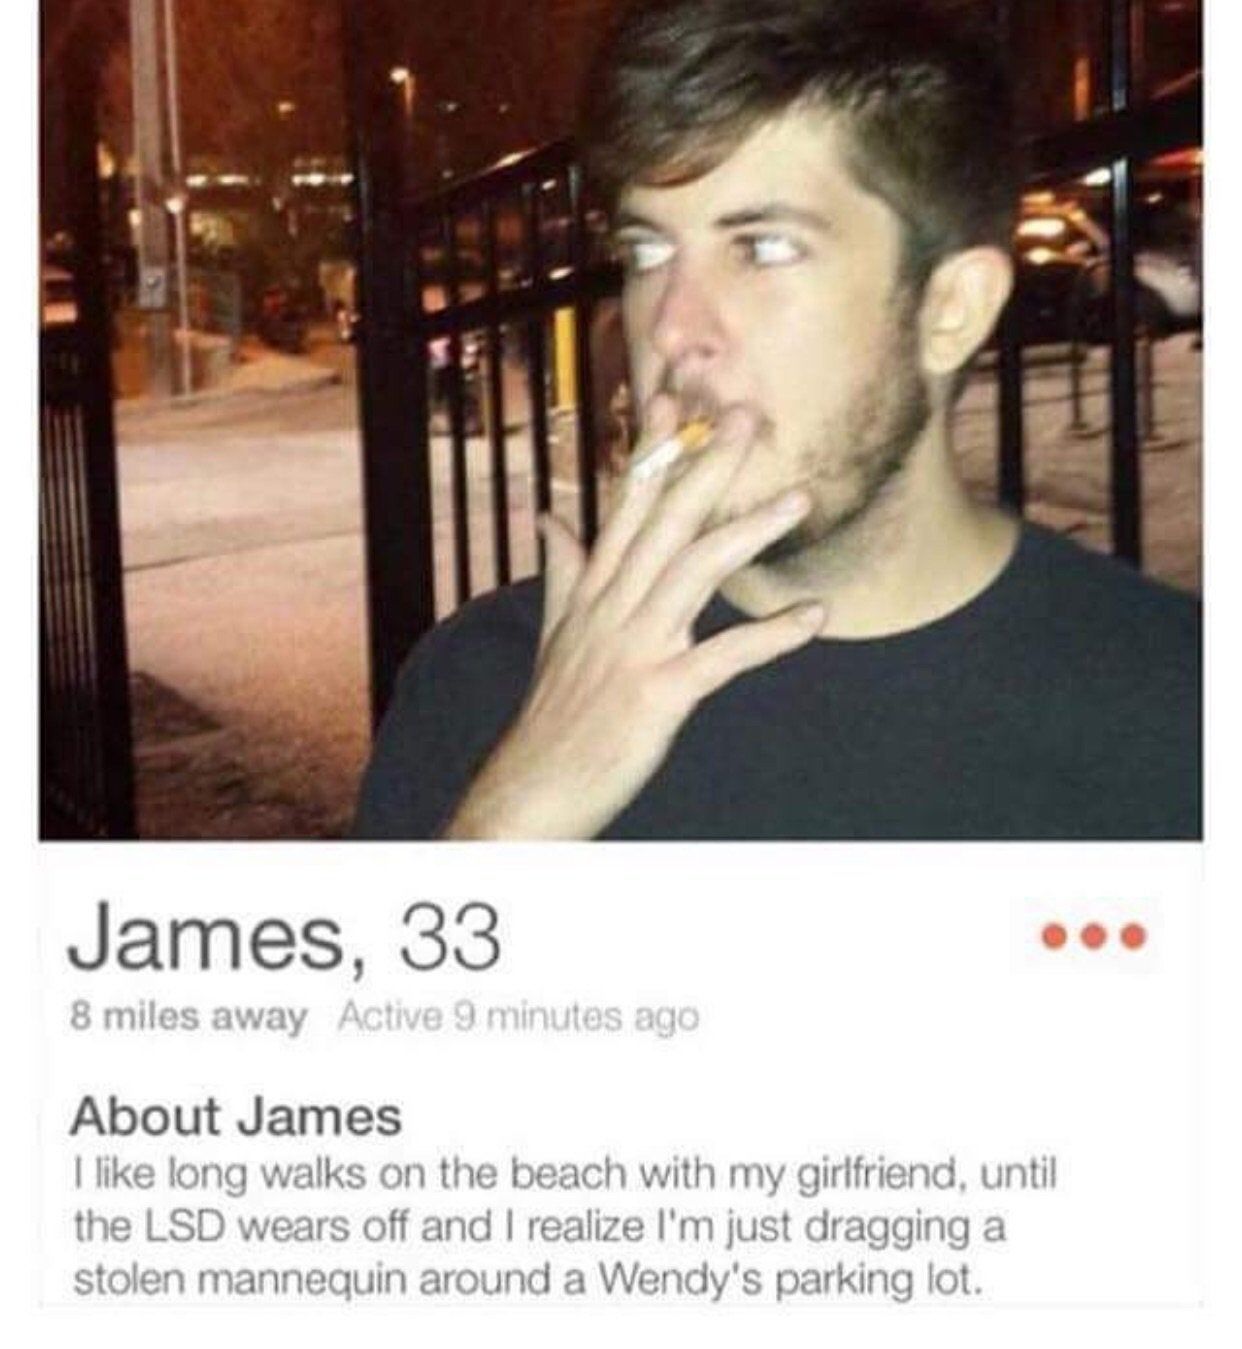 Yeah, I'd probably super like this guy